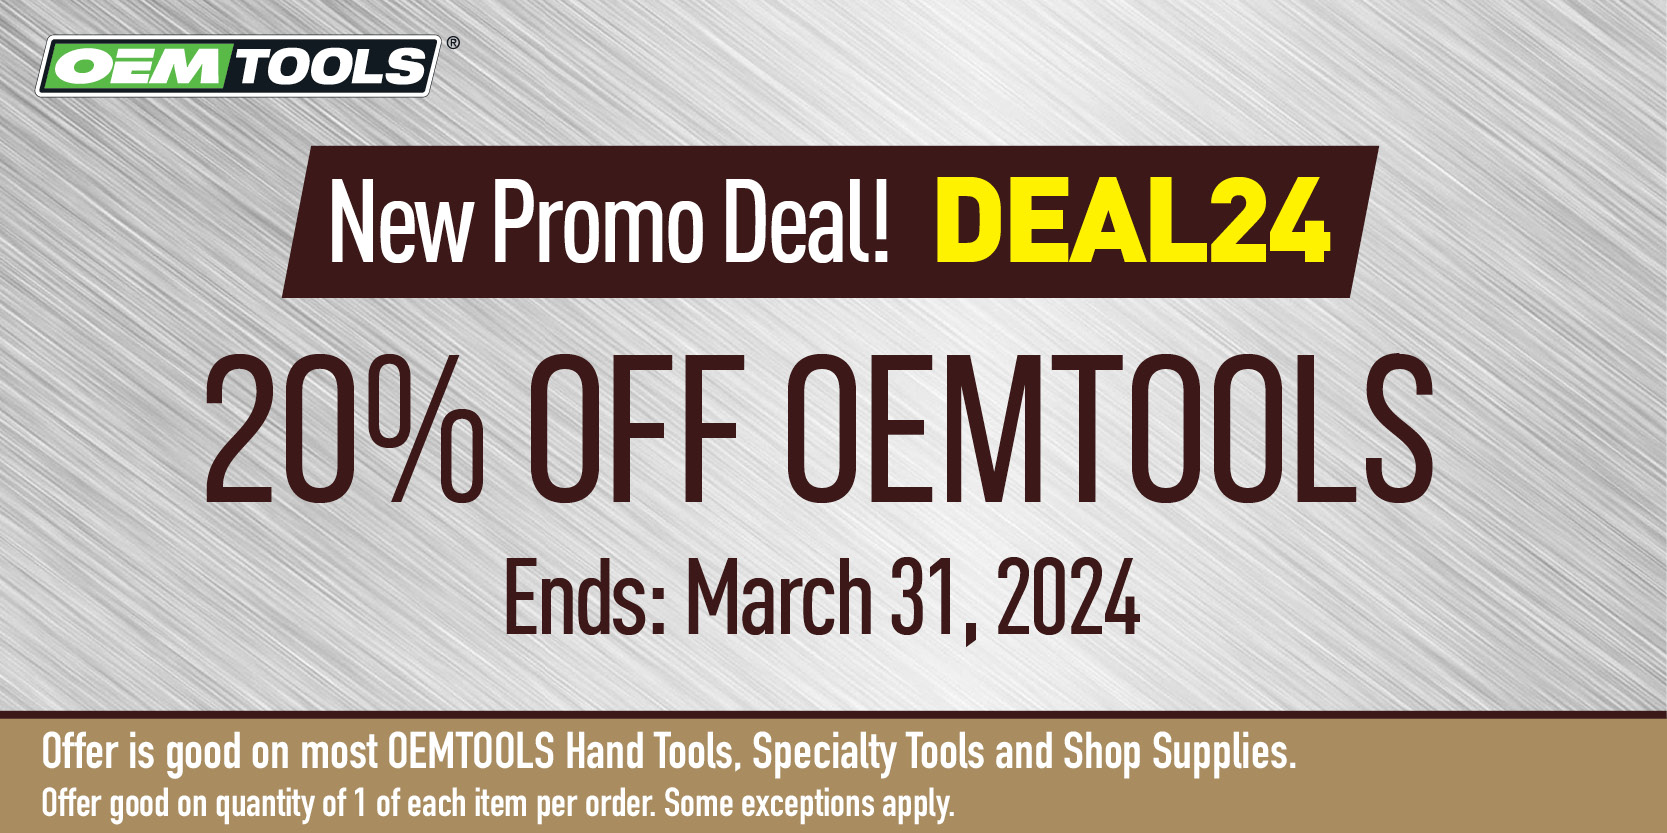 20% OFF most OEMTOOLS with promo code DEAL24